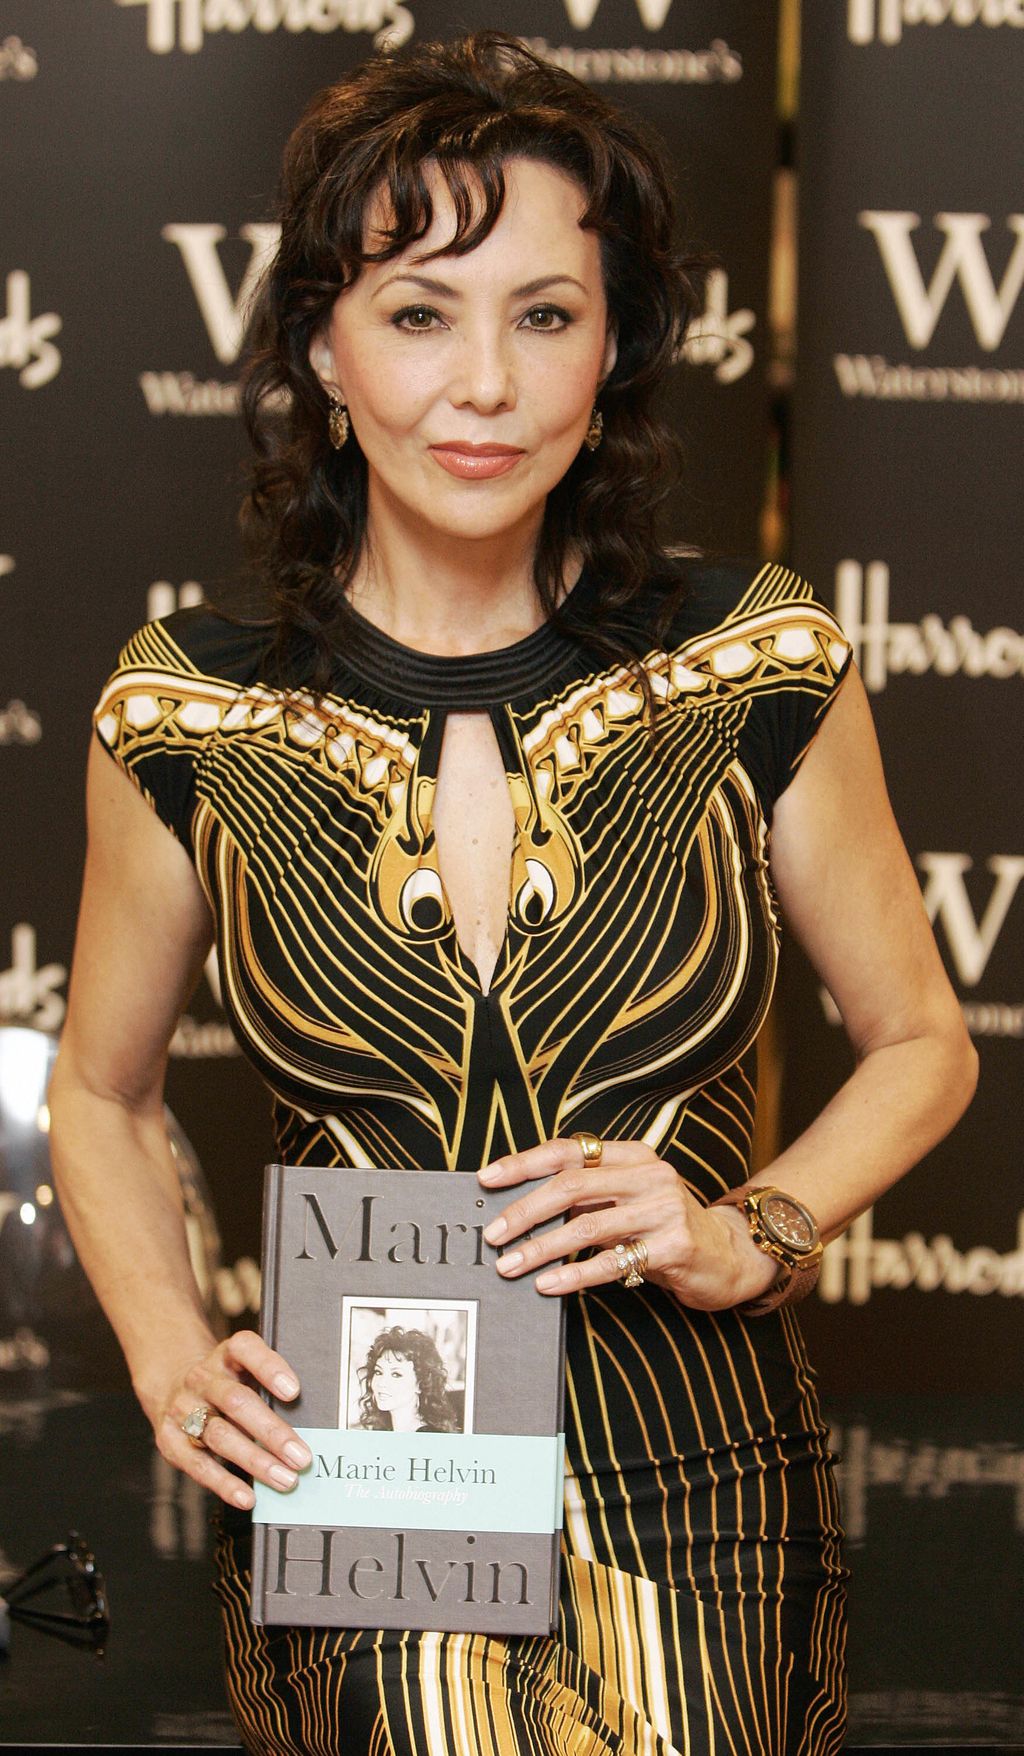 Supermodel and international fashion icon, Marie Helvin, poses with her new book at a photo call at London's Harrods department store 28 September 2007. Her book 